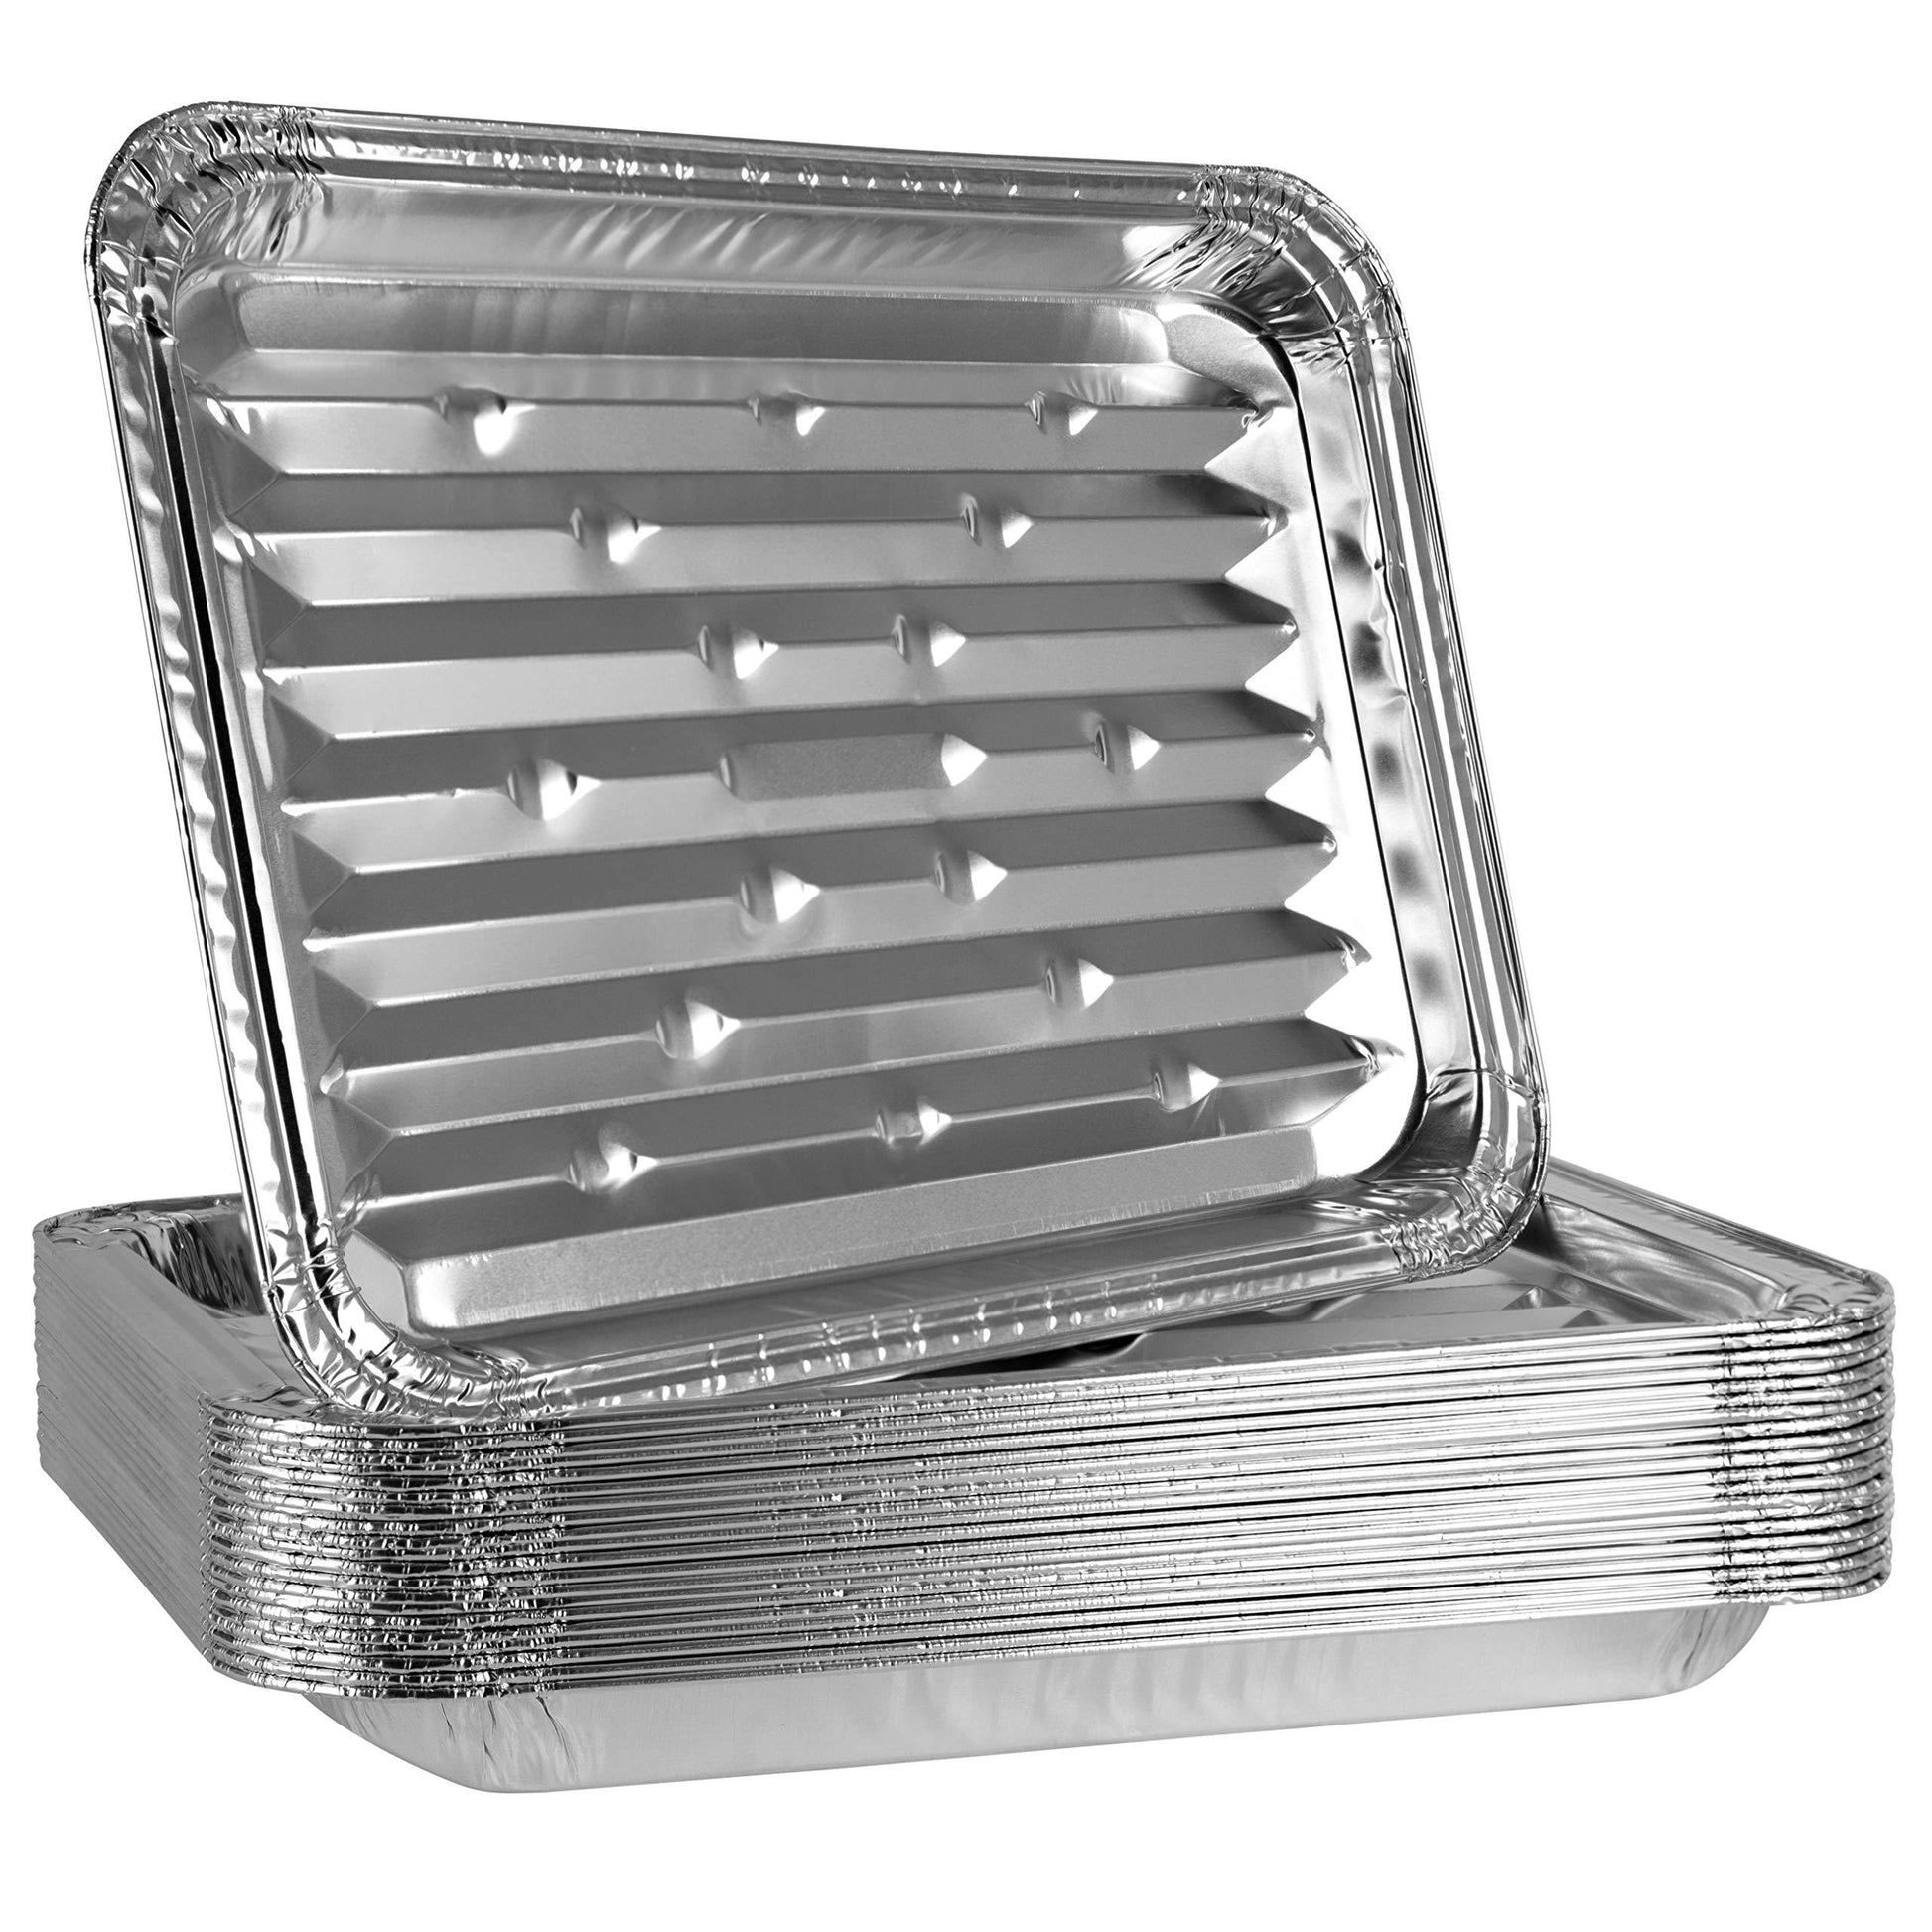 Plasticpro Aluminum Grill Pans, Broiler Pans, Grill Liners, Durable with Ribbed Bottom Surface for BBQ, Grill, Texture Disposable,Pack of 10 - CookCave